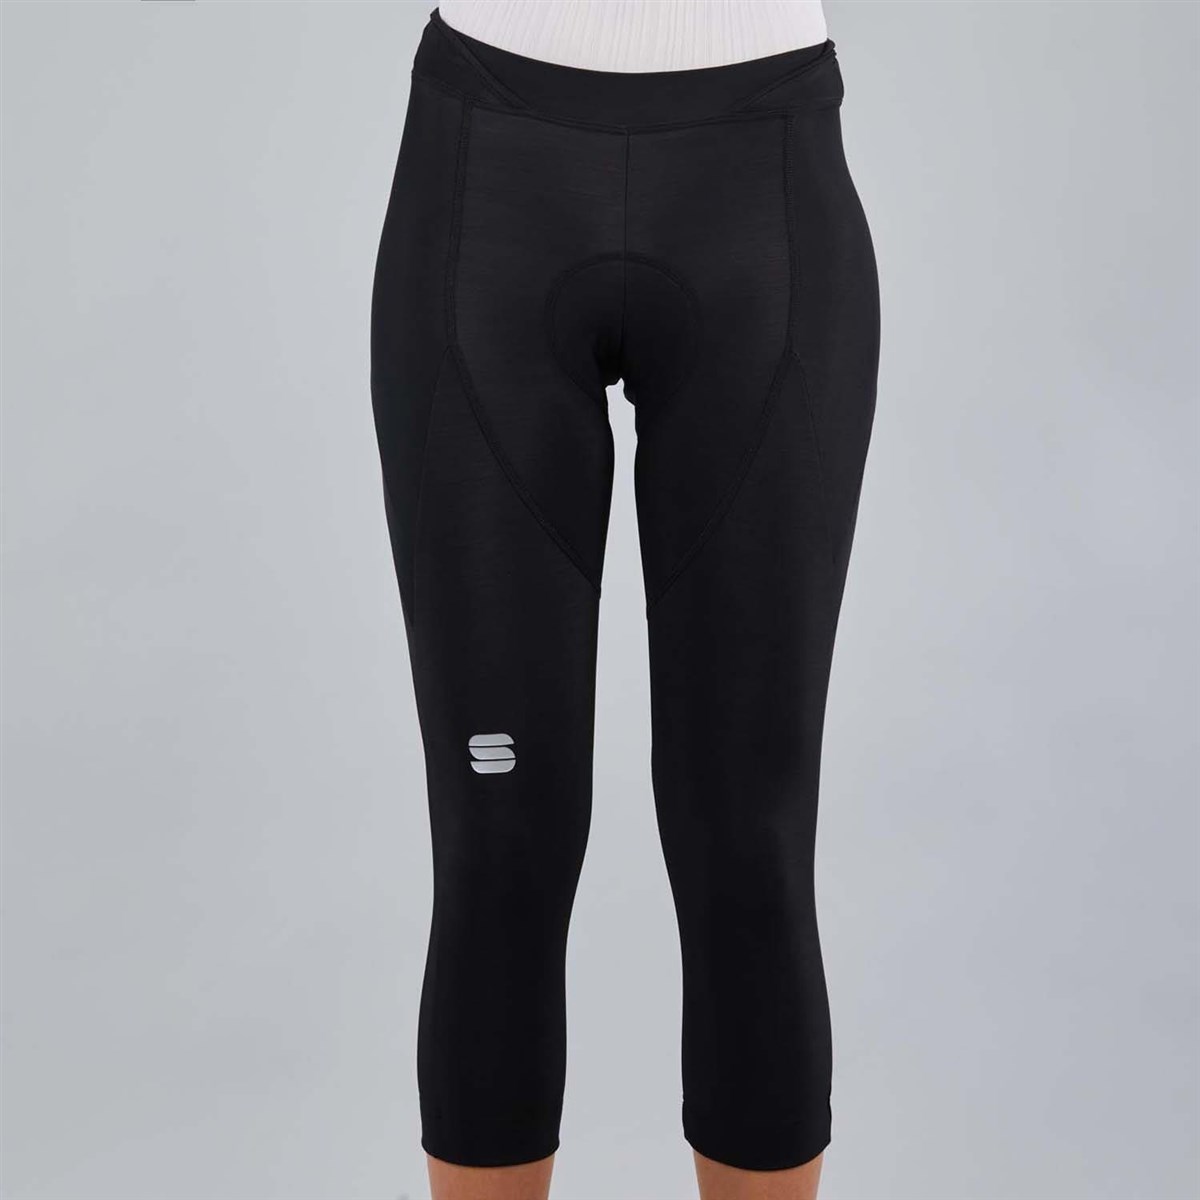 Sportful Neo Womens Cycling Knickers product image